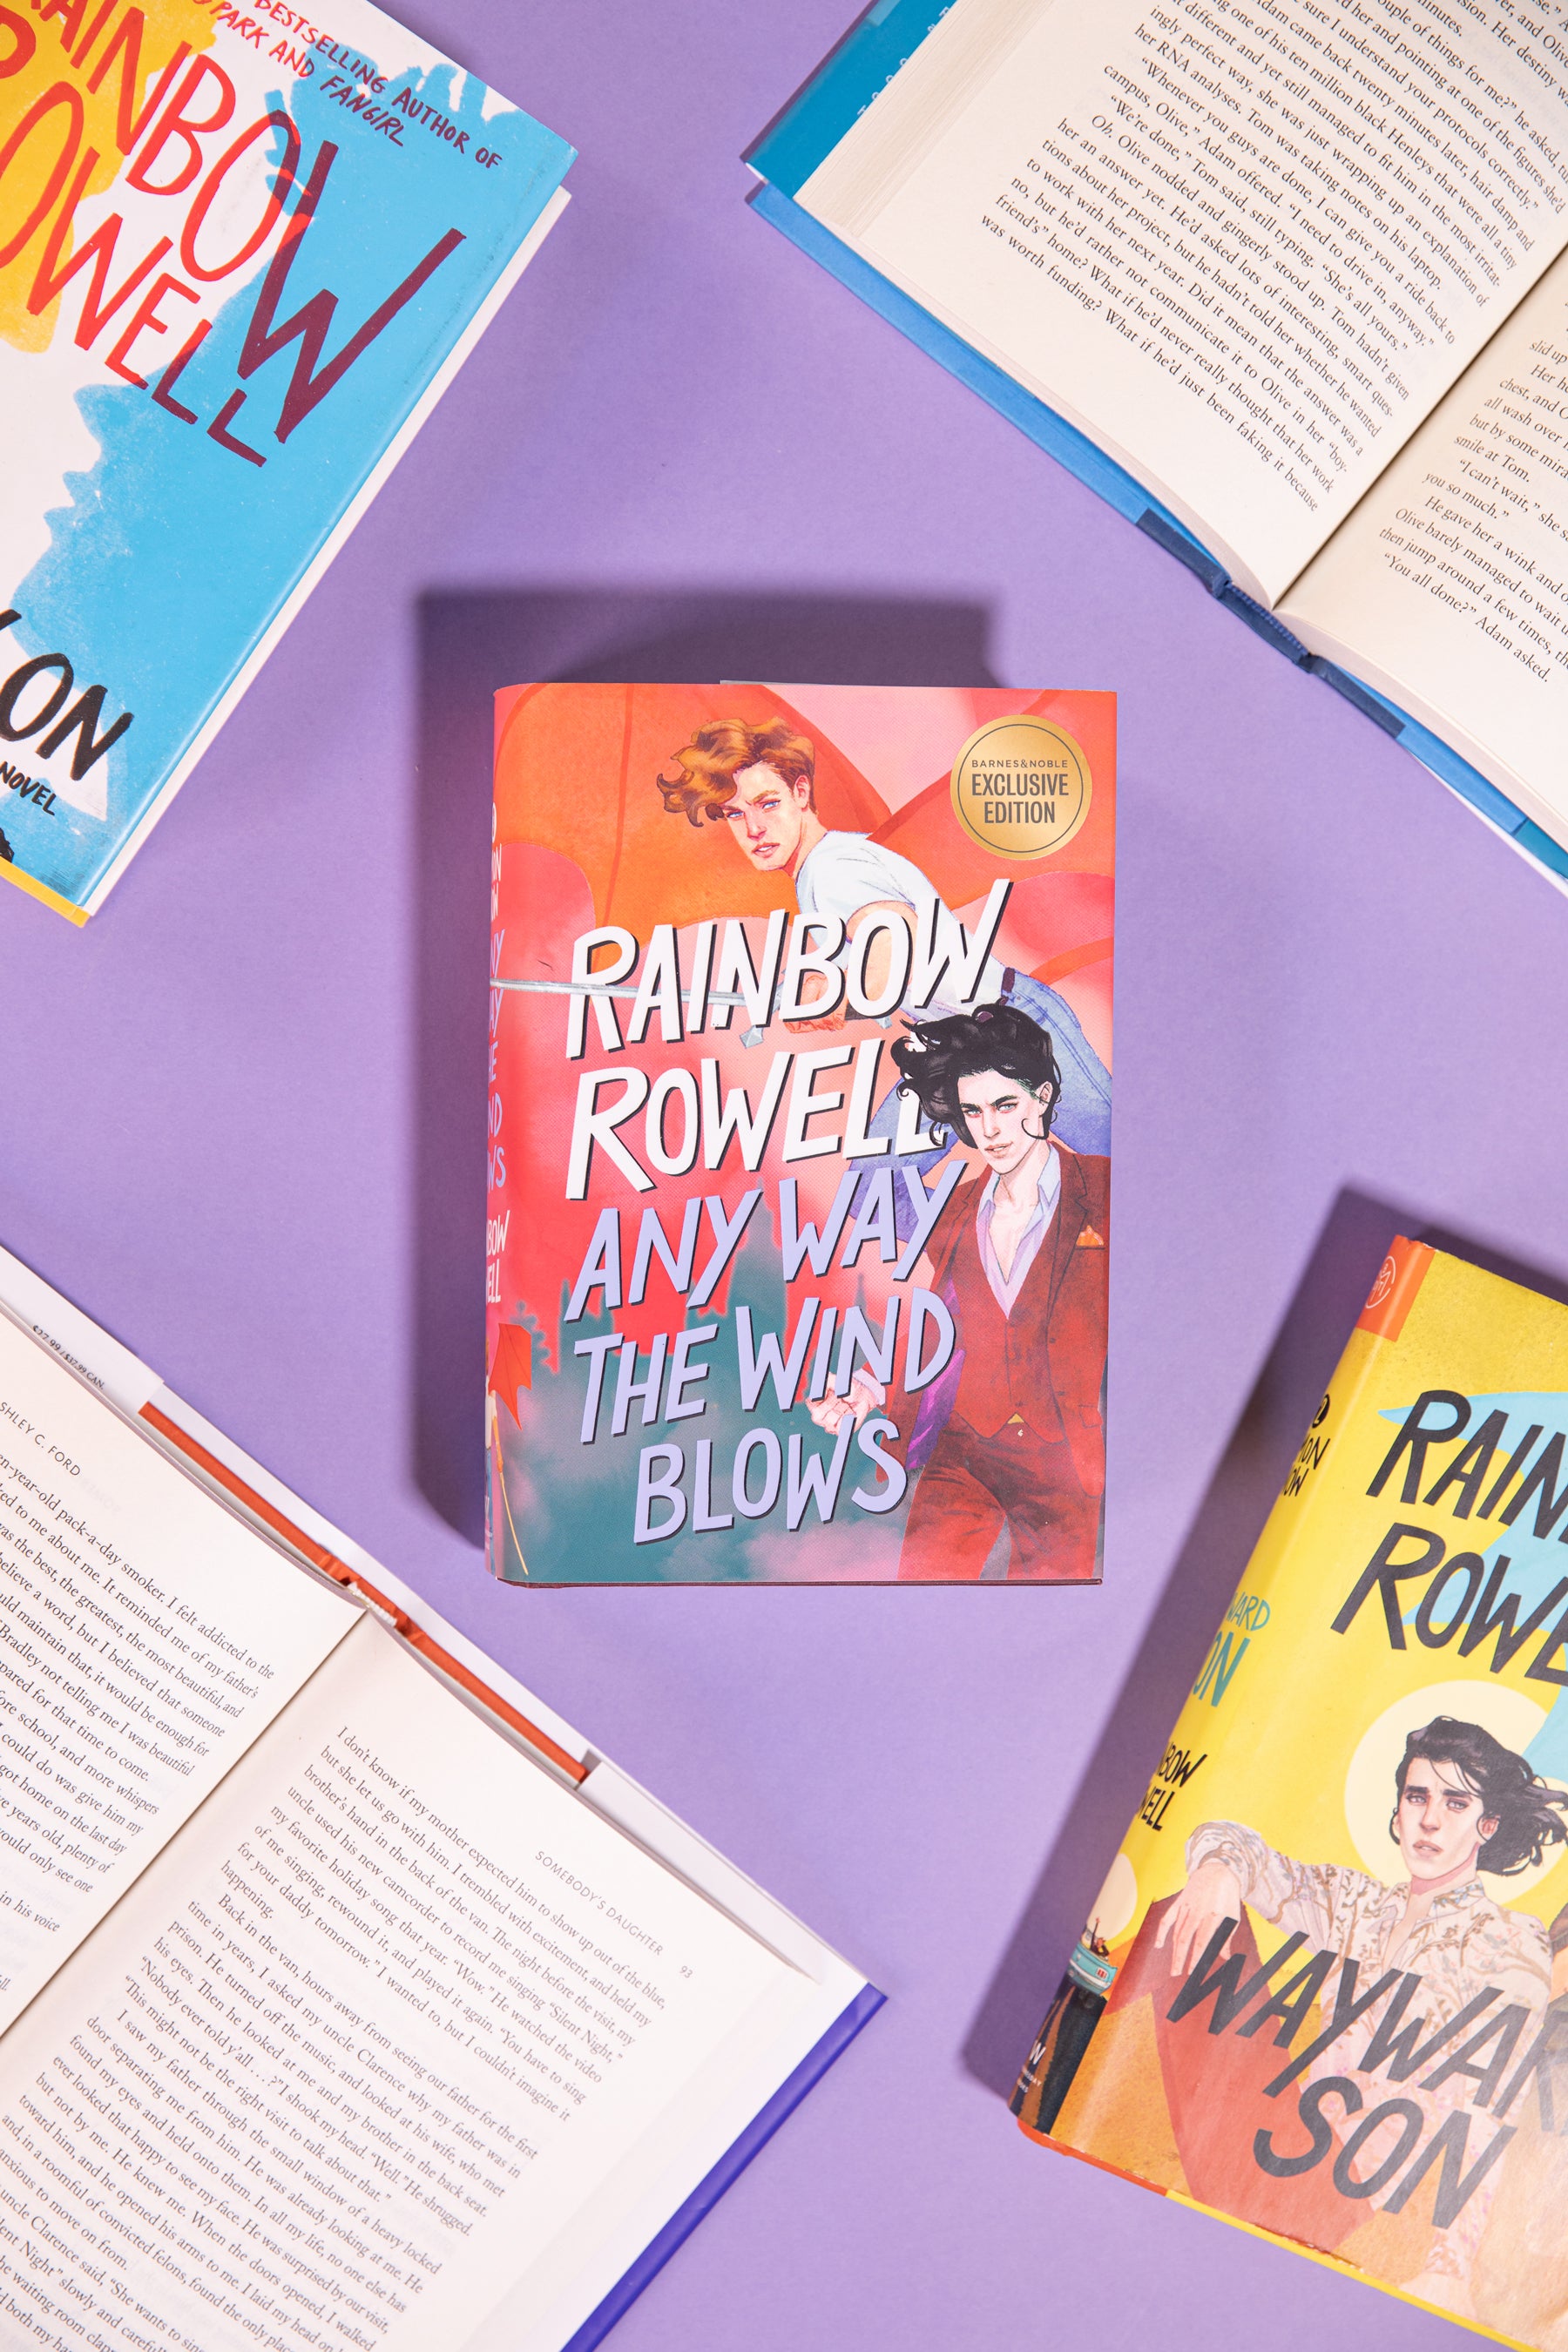 Any Way the Wind Blows, Simon Snow trilogy by Rainbow Rowell